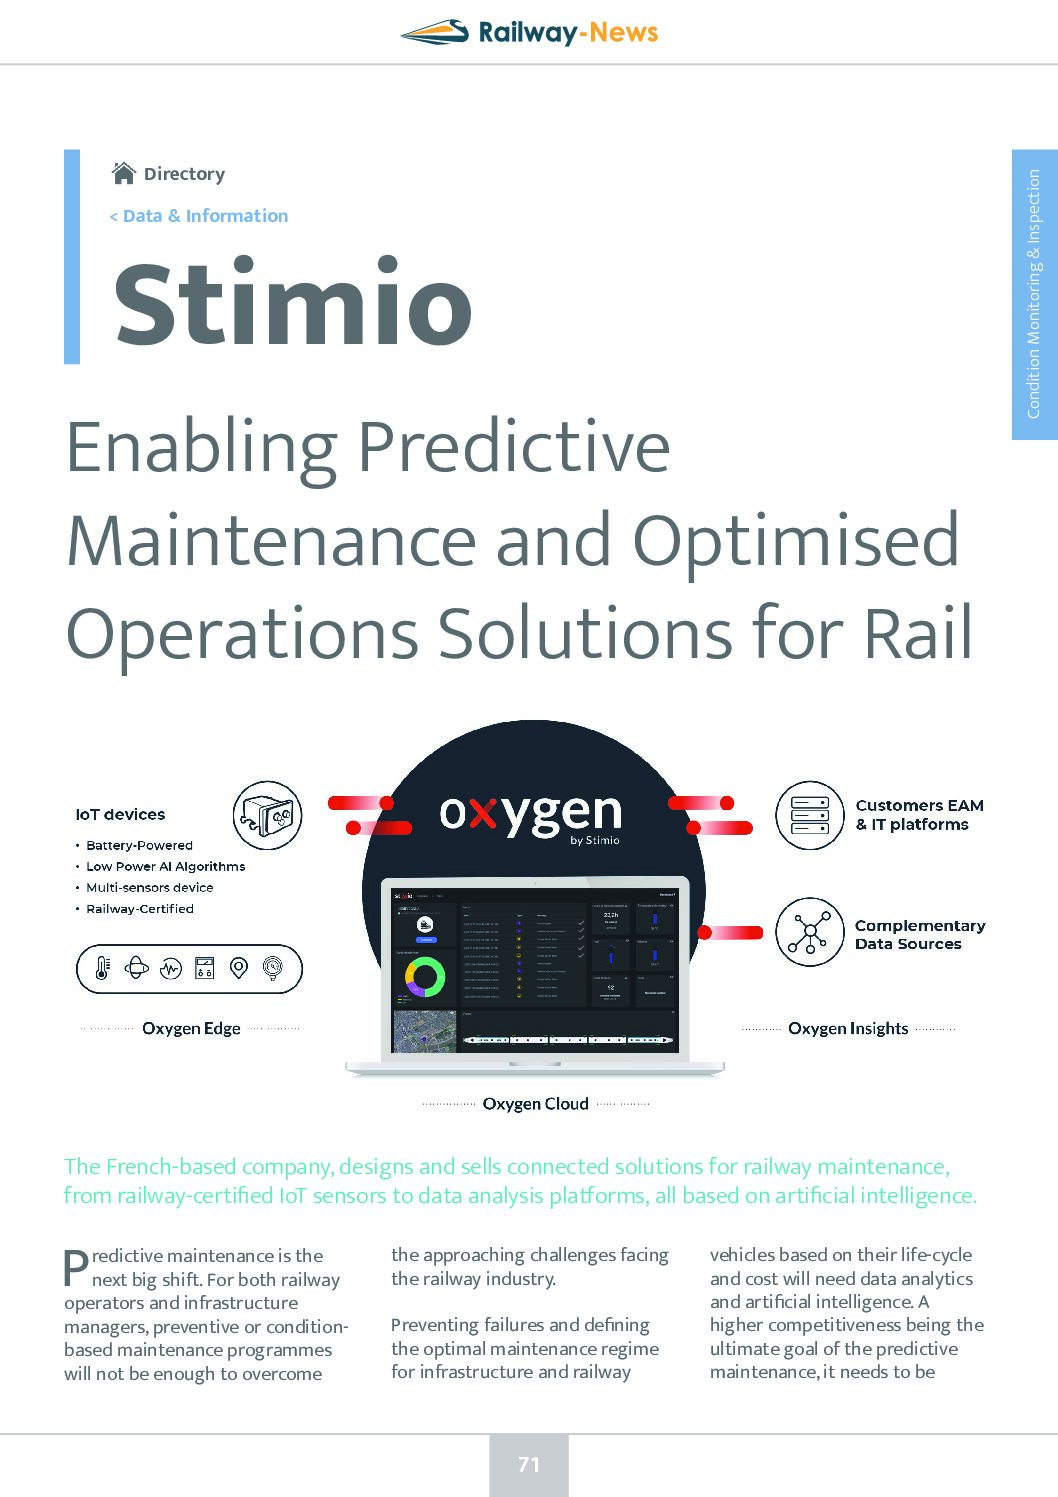 Stimio – Predictive Maintenance & Optimised Operations Solutions for Rail